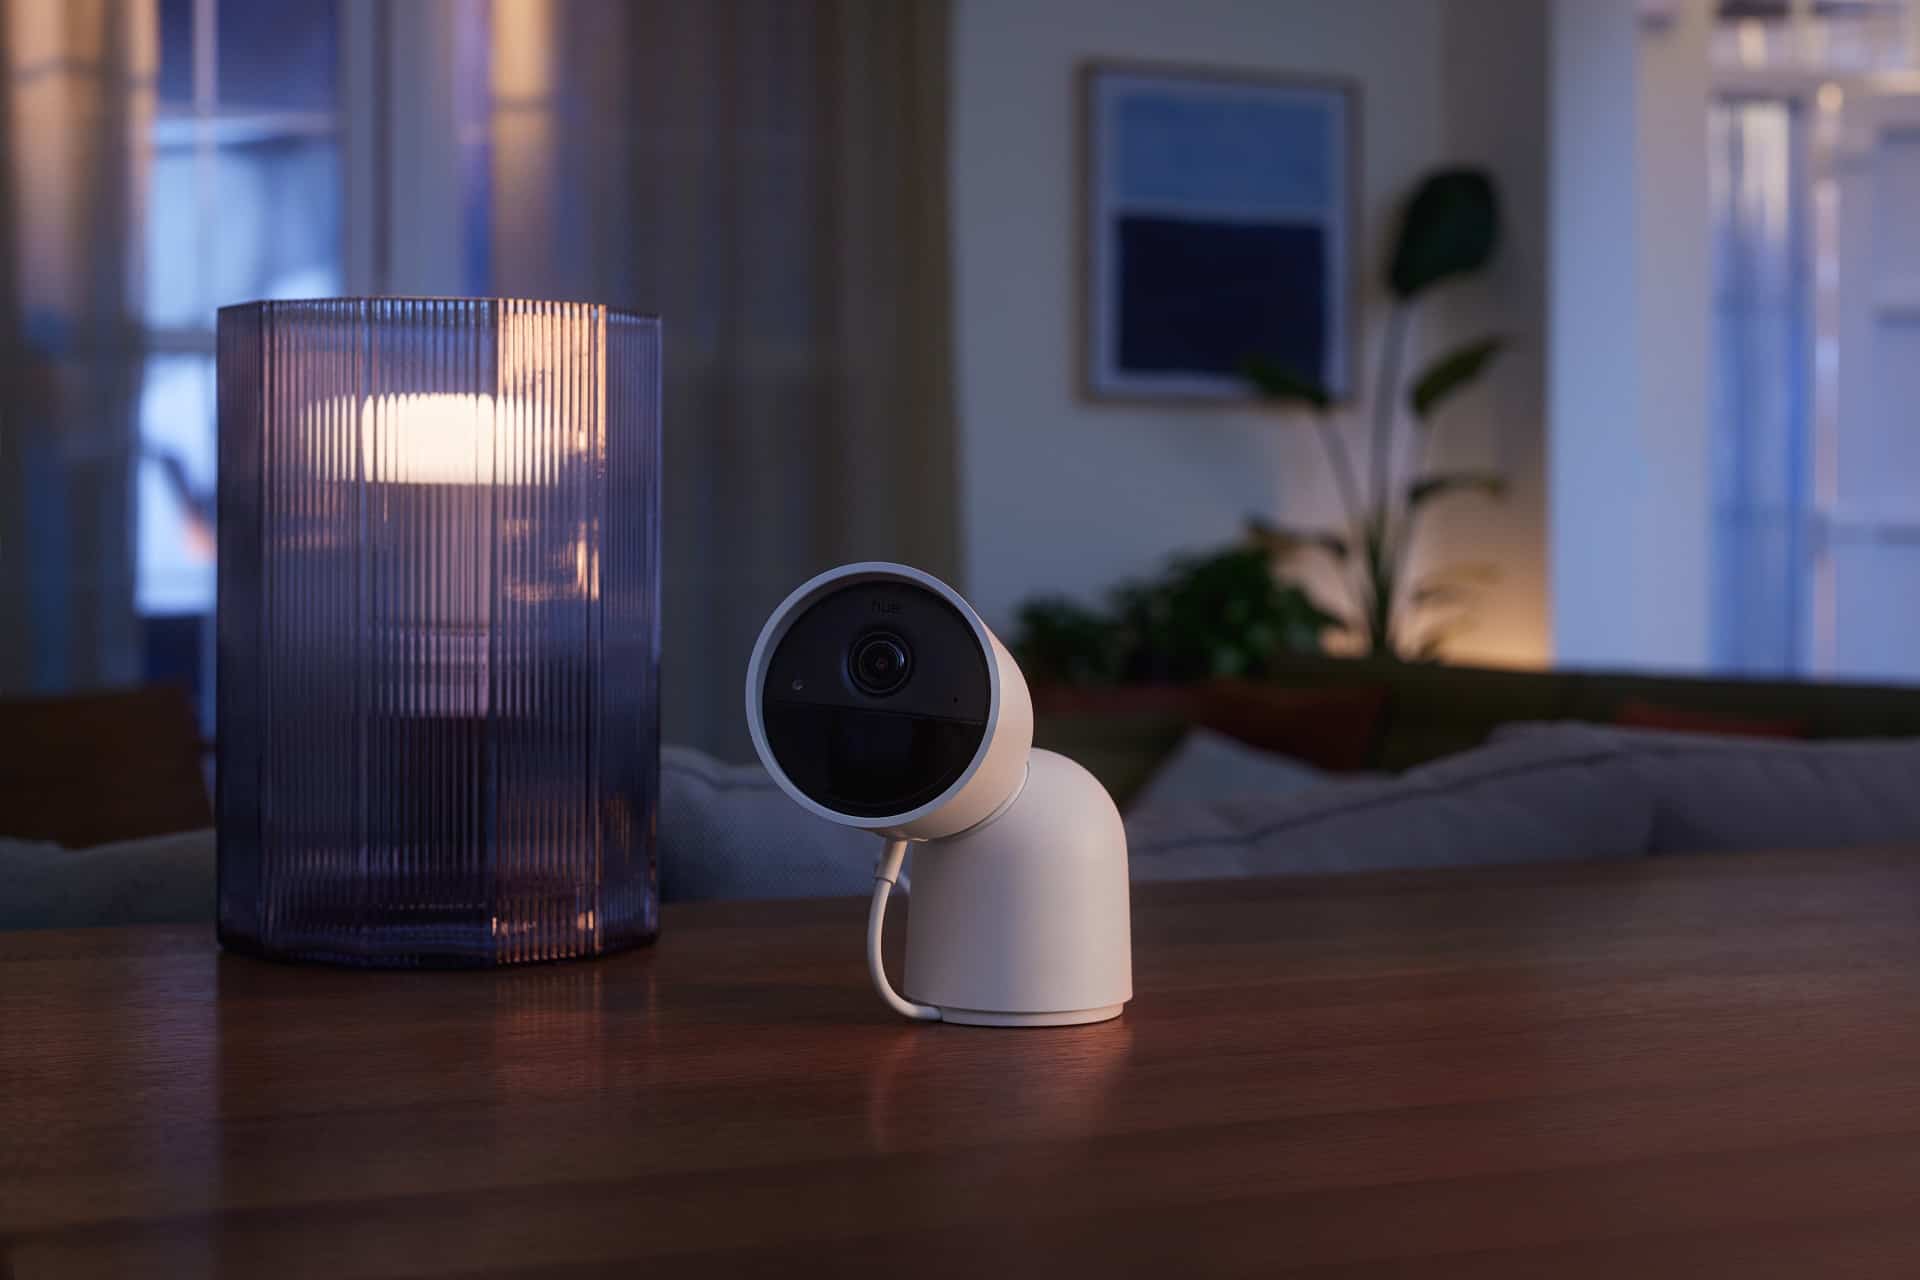 Philips Hue secure camera in a living room